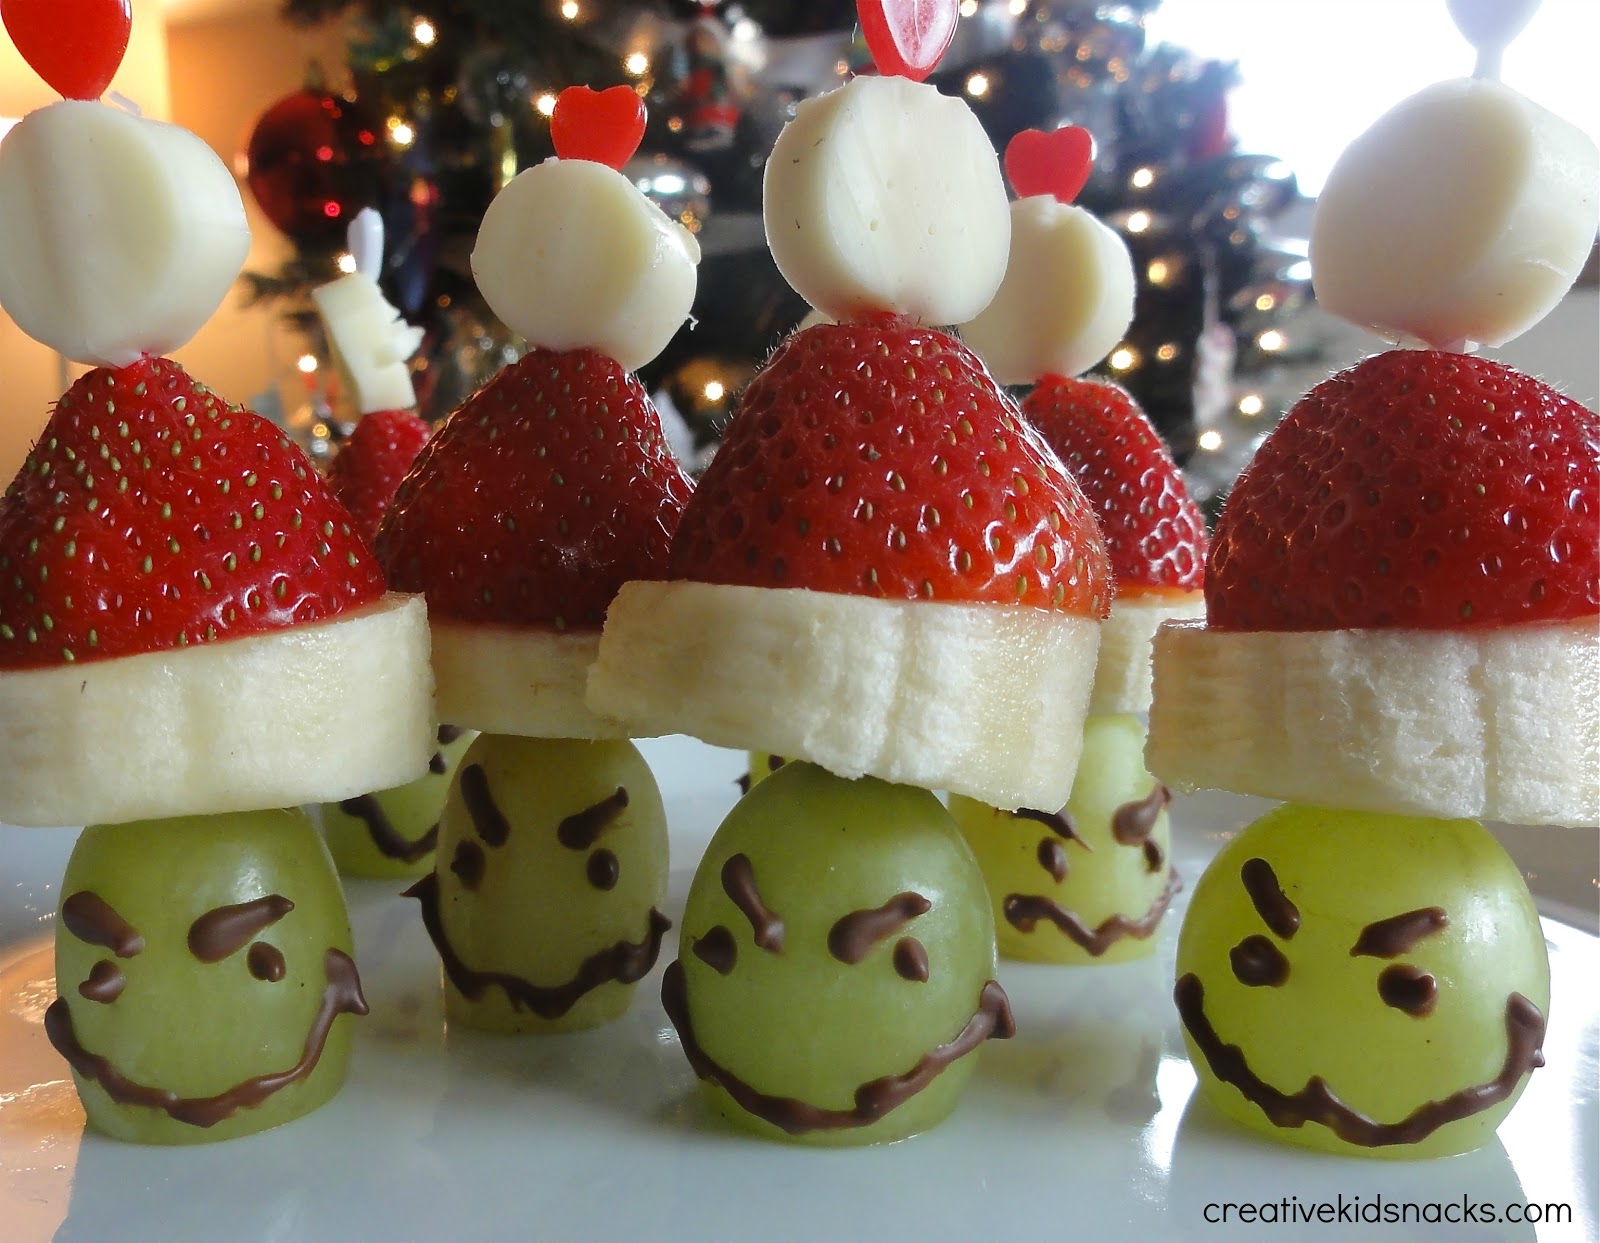 Try a Grinch-themed snack, Taste